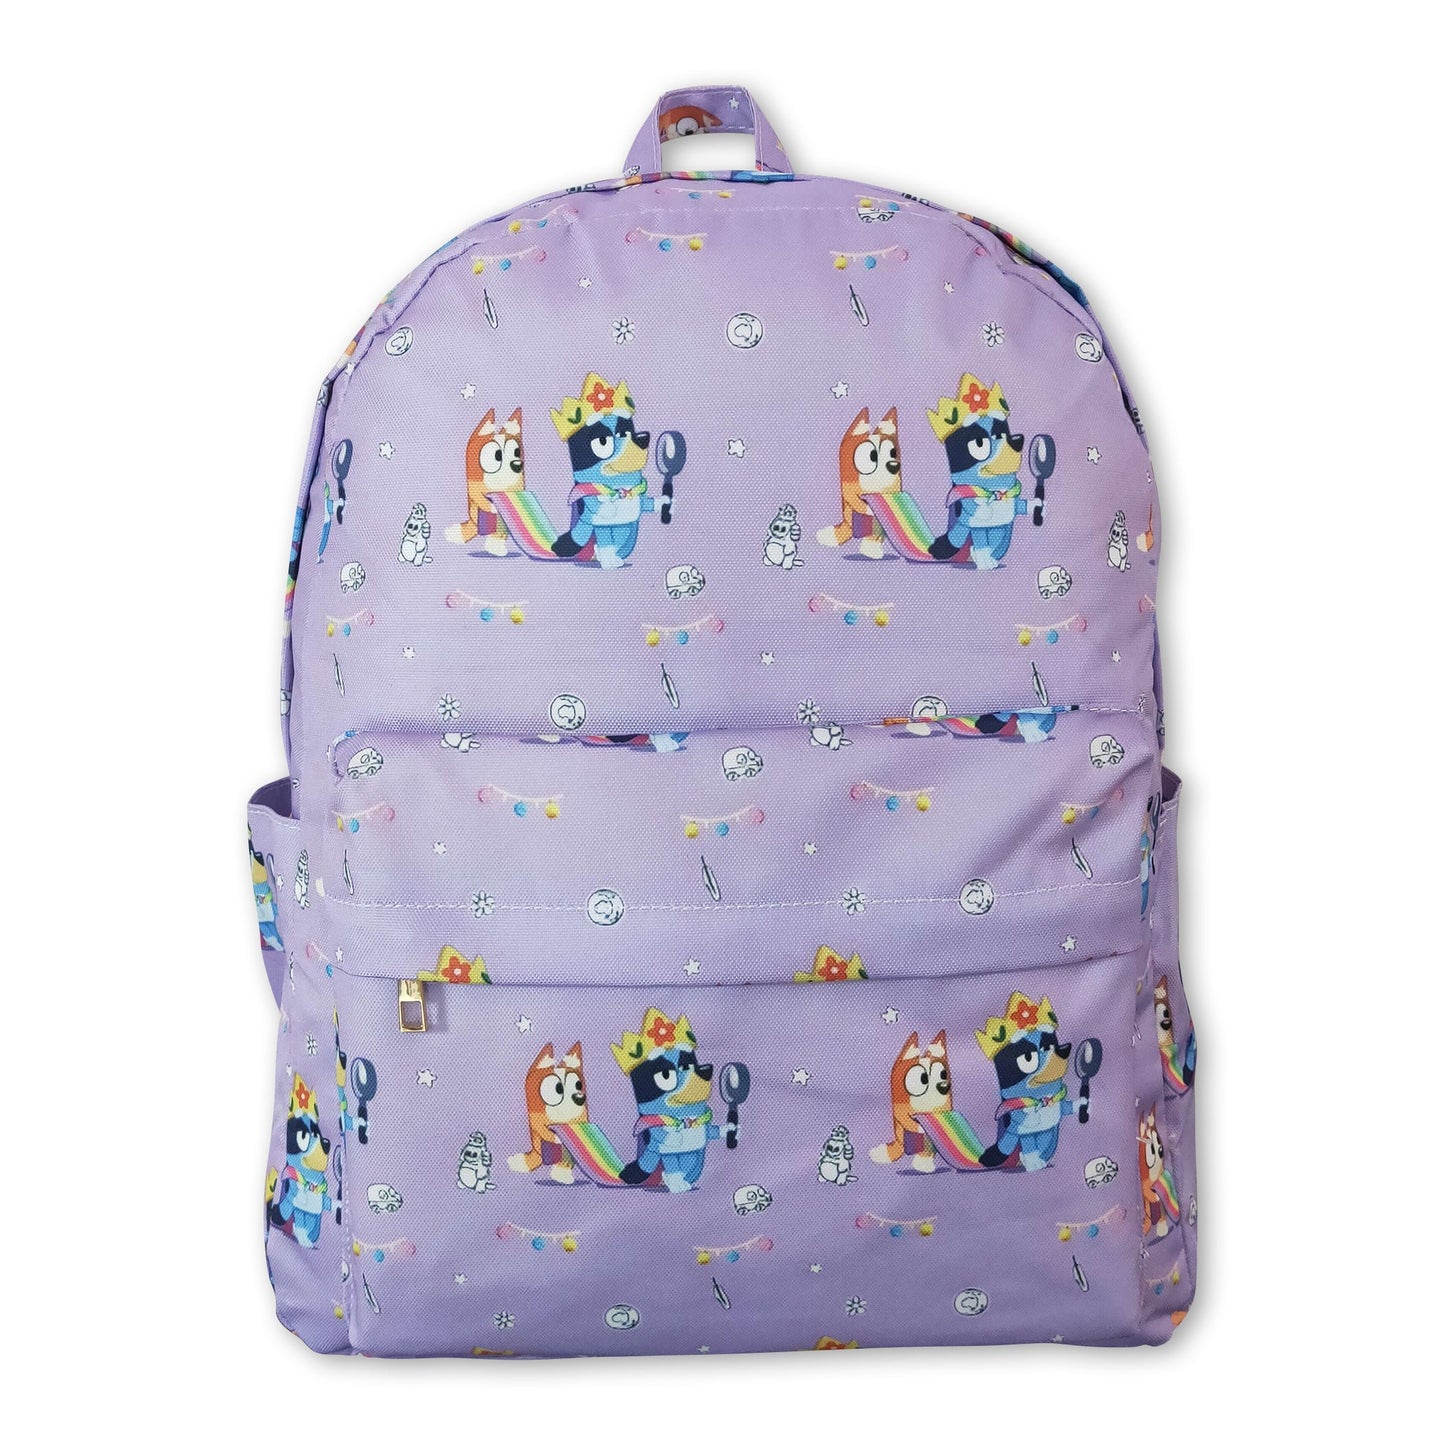 Blue dogs cute baby girls back to school backpack